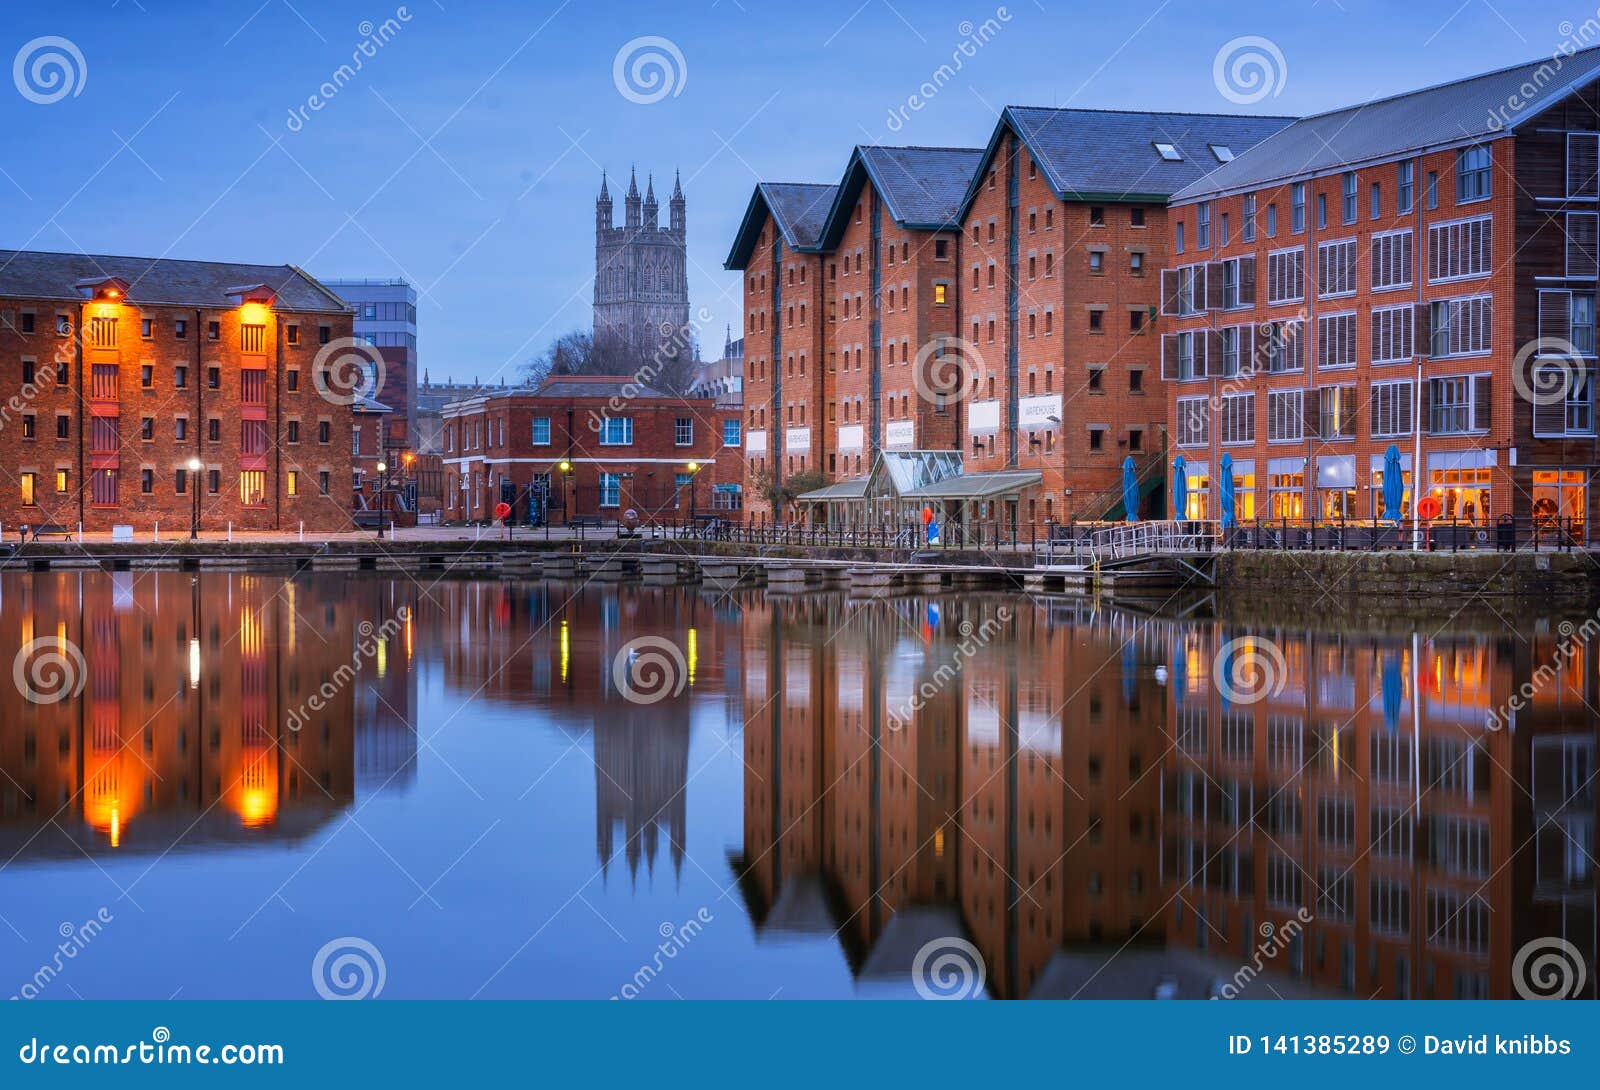 gloucester docks and cathedral reflected in the quay on sharpness at twilight